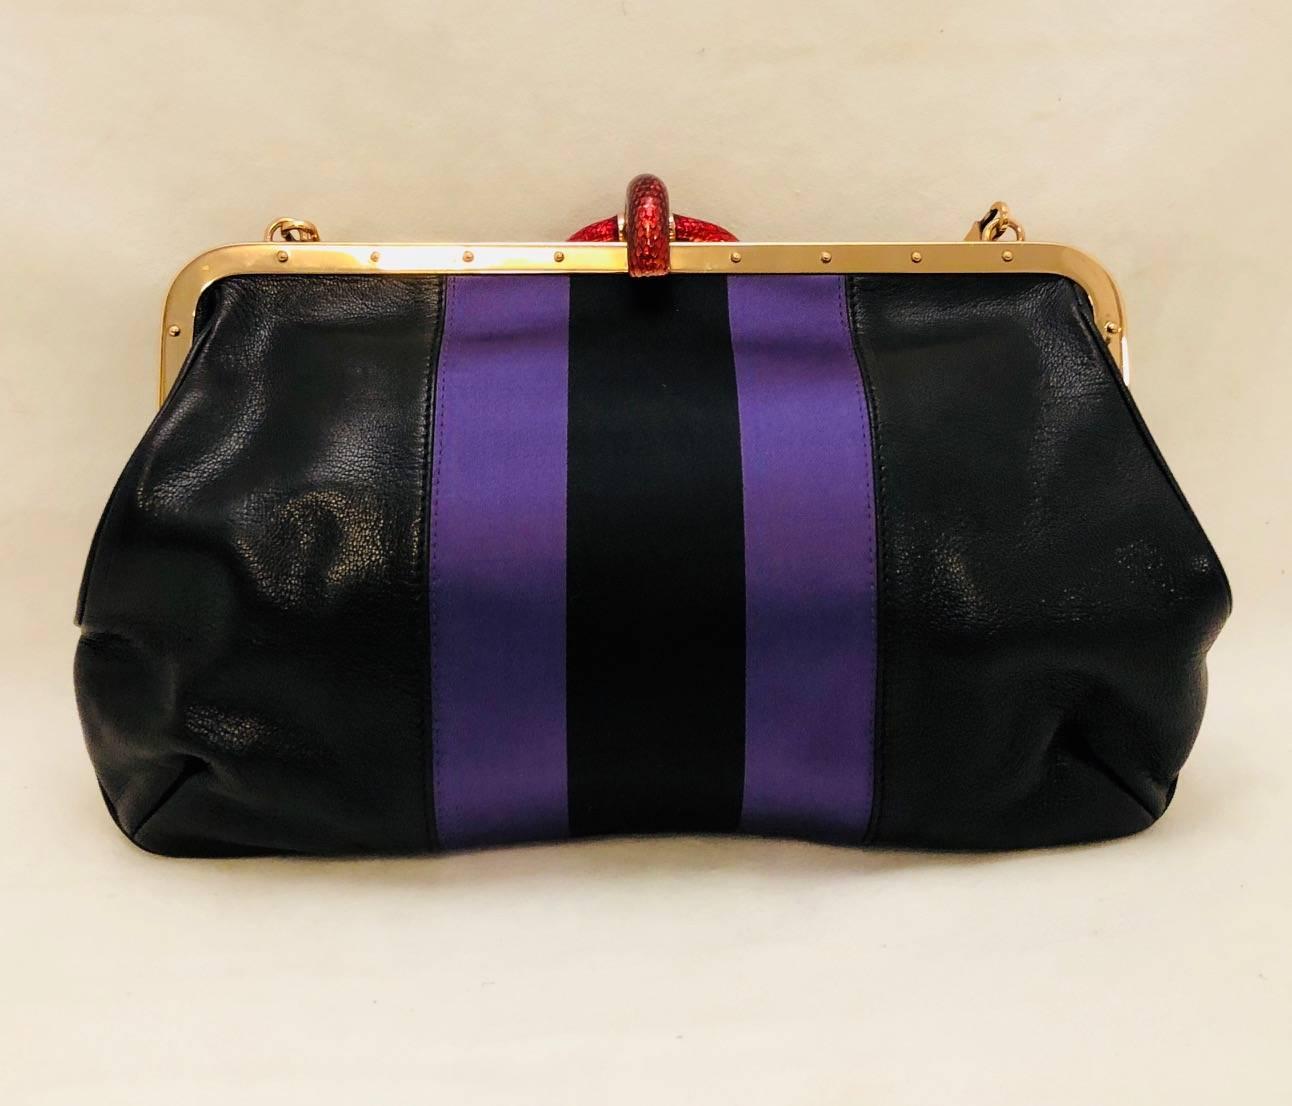 Gucci Tom Ford era designed this stylish and intricate black leather handbag with purple and black satin stripes across the middle and a red enamel snake with one large Swarovski crystal in its mouth for closure creating a whimsical captivating